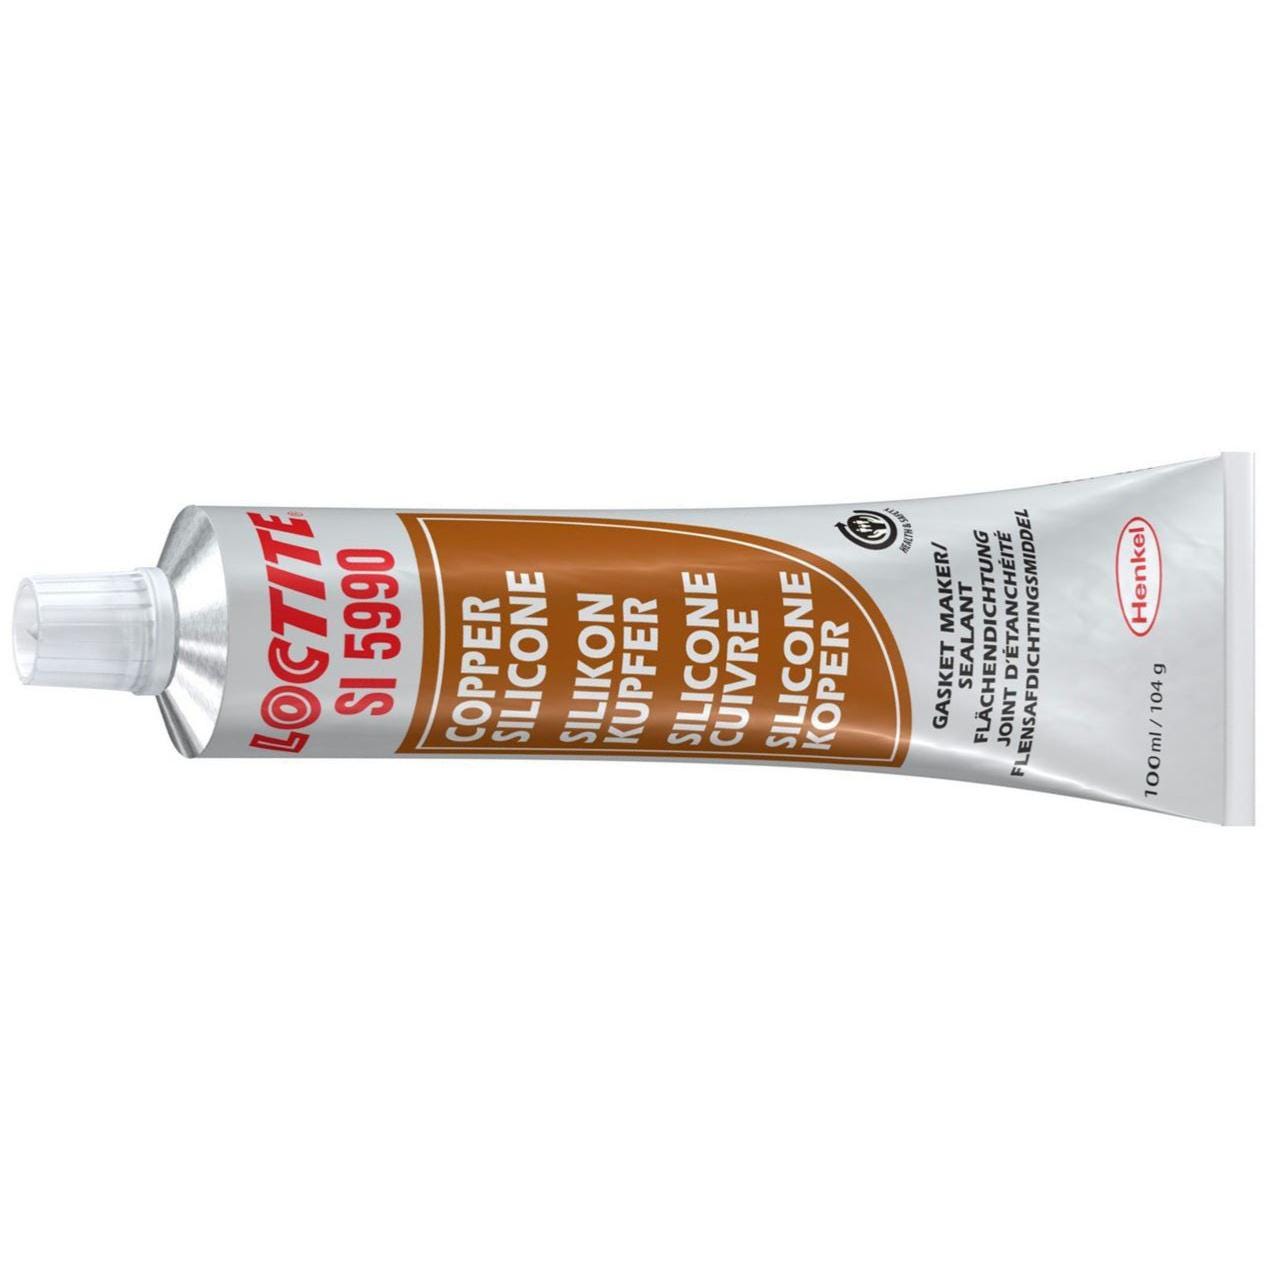 PATE A JOINT CARTER MOTEUR SILICONE CUIVRE LOCTITE 5990, TUBE 100 ml 0